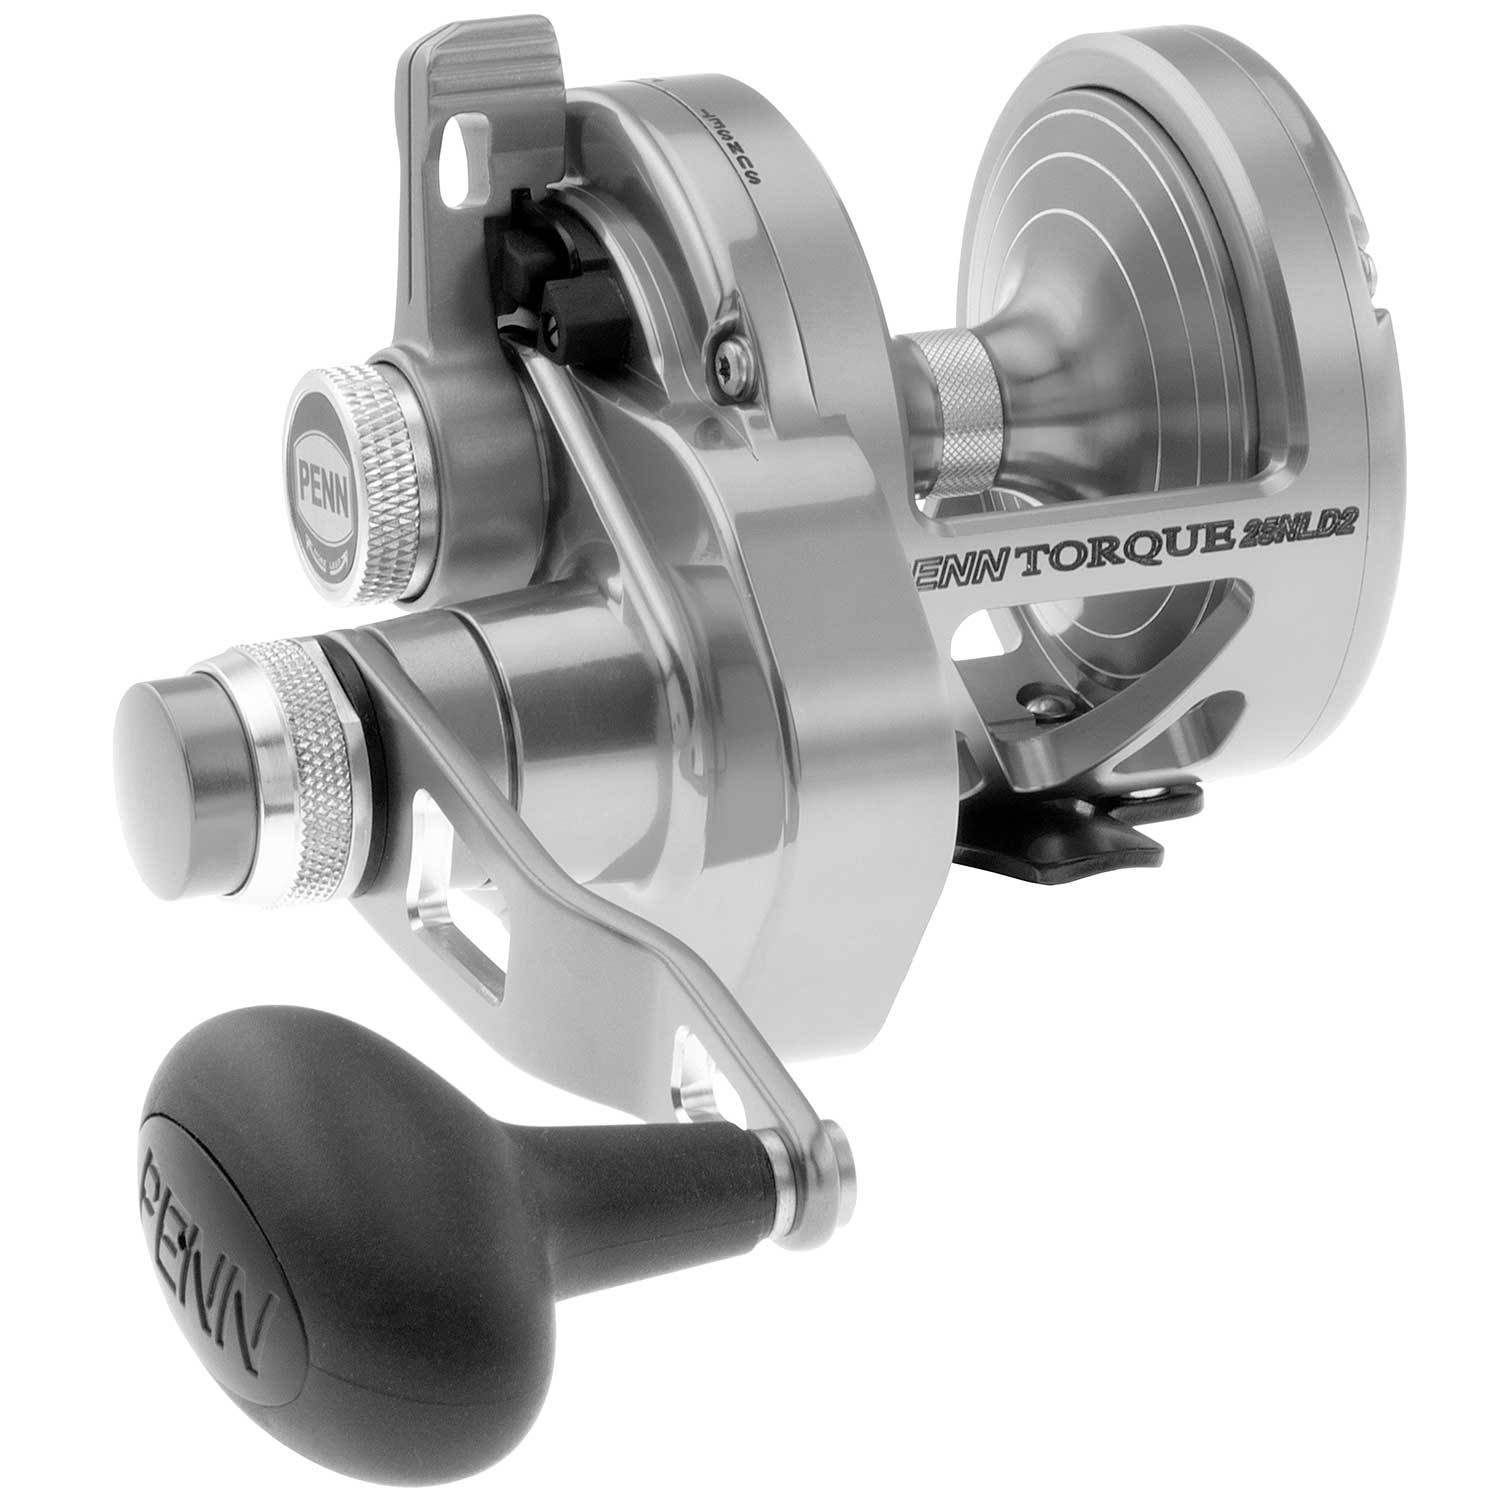 PENN Torque® 25NS 2-Speed Lever Drag Conventional Reel